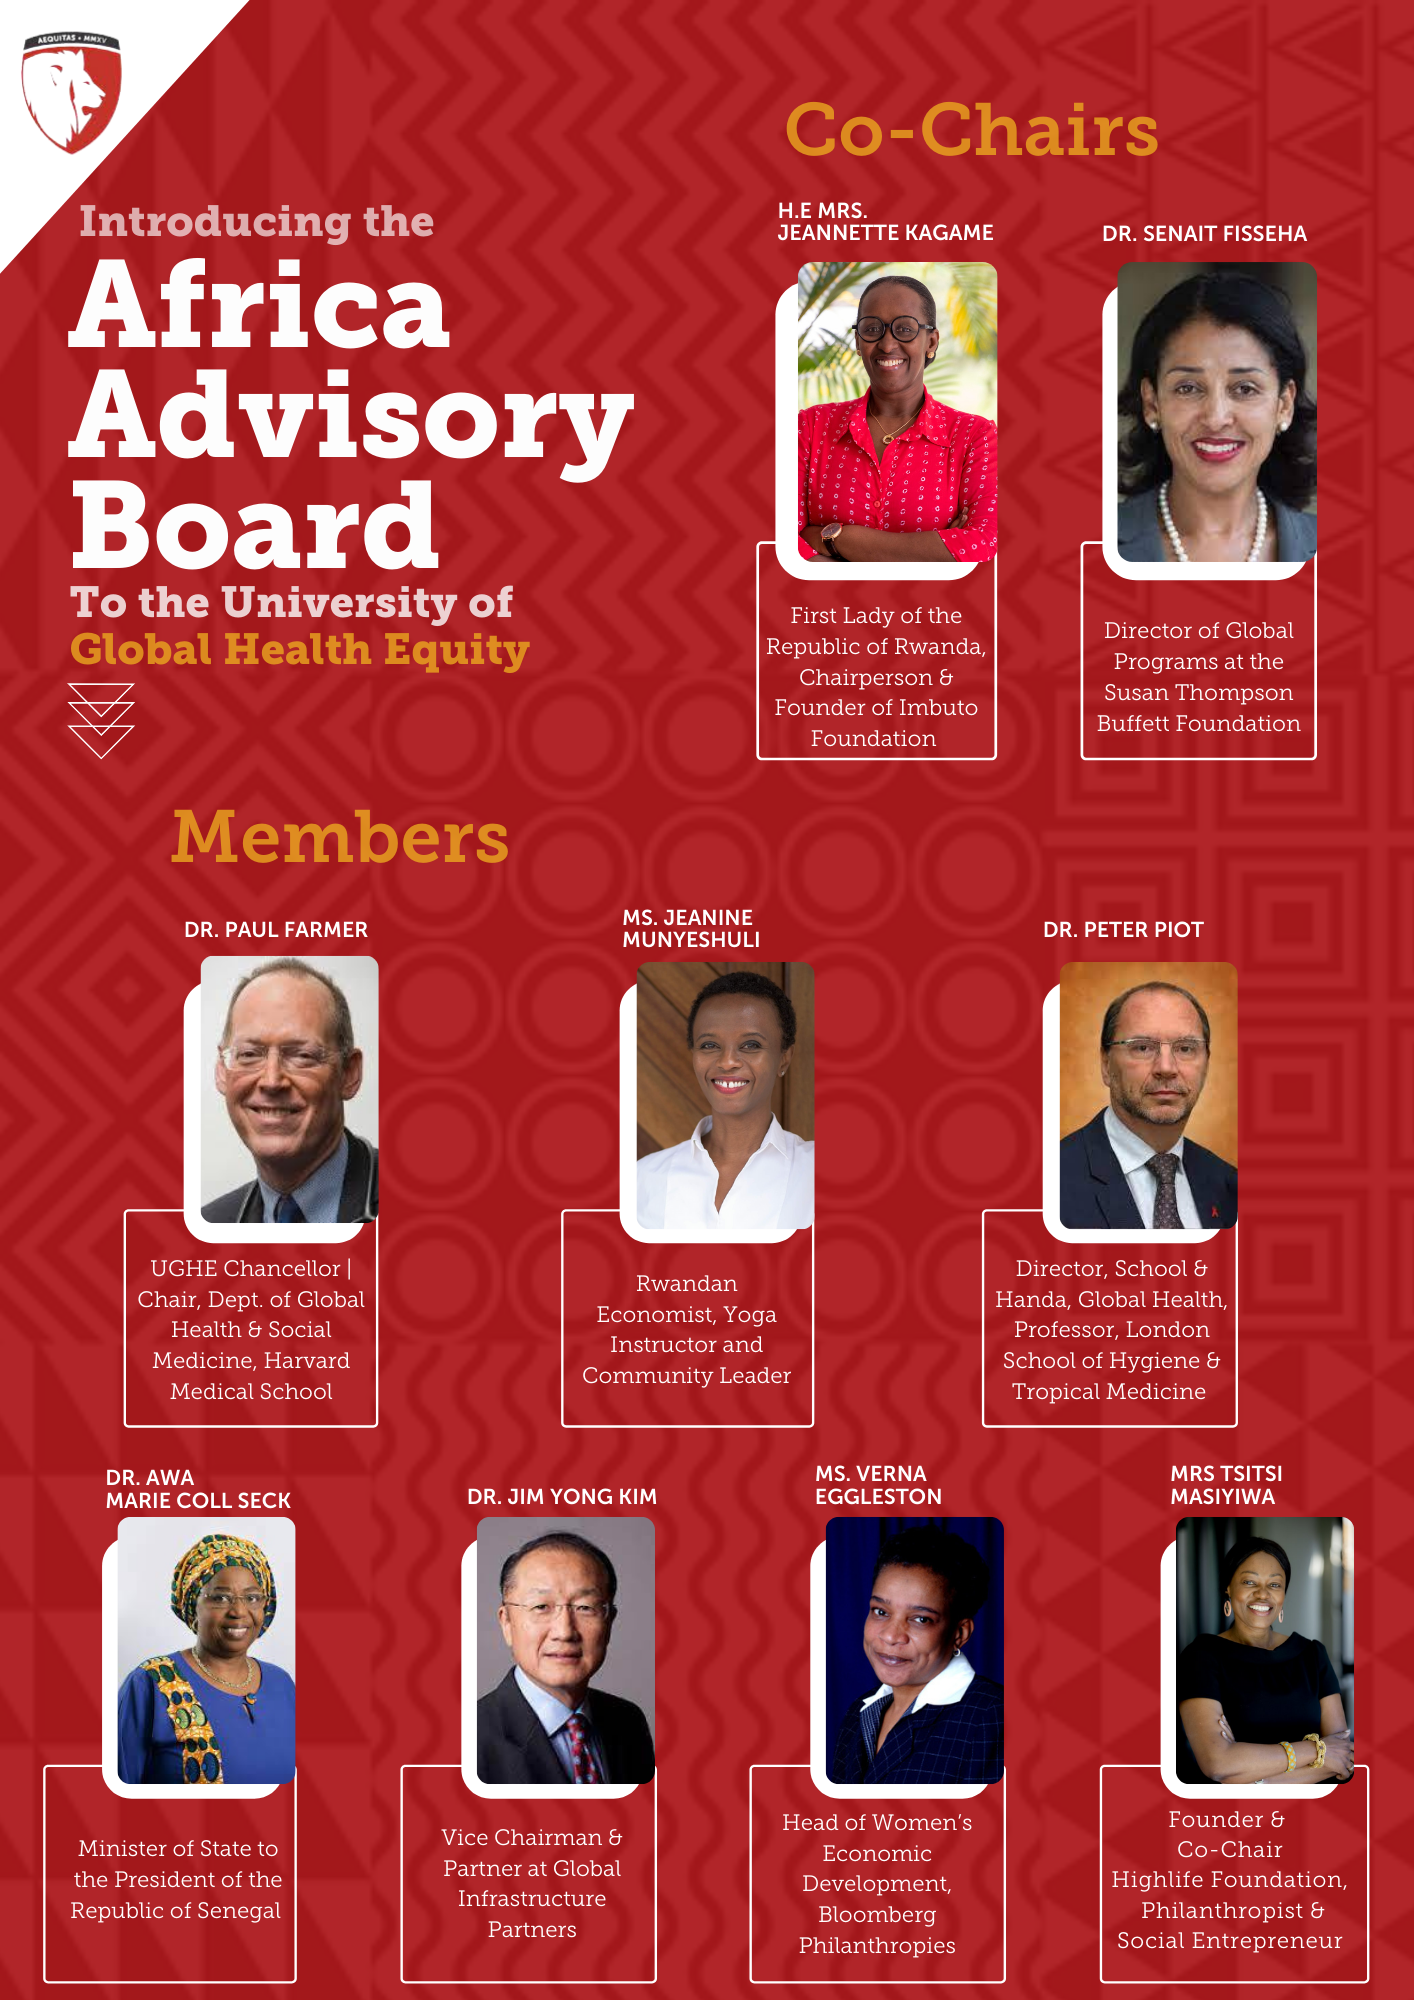 Launch Of The African Advisory Board To Support The University Of Global Health Equity Mission